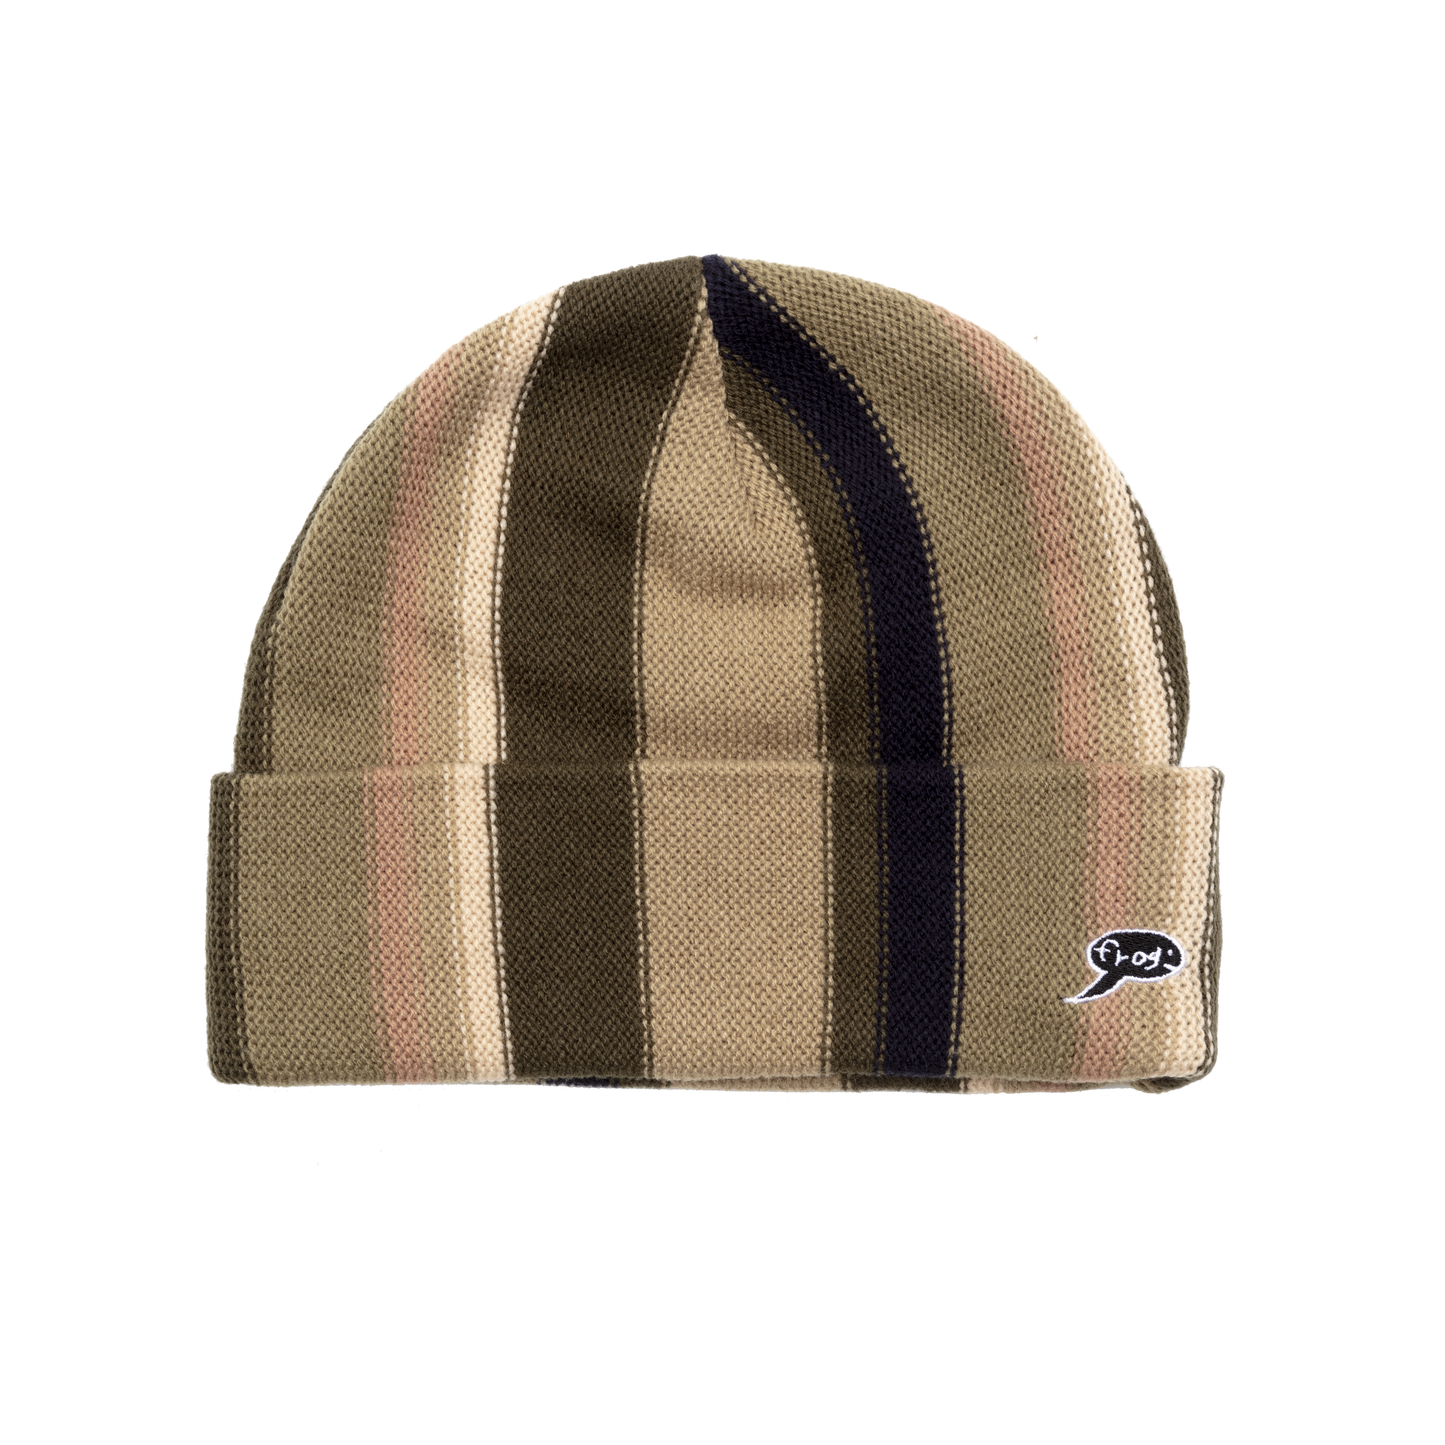 Frog Vertical Stripe Beanie: Assorted Colors